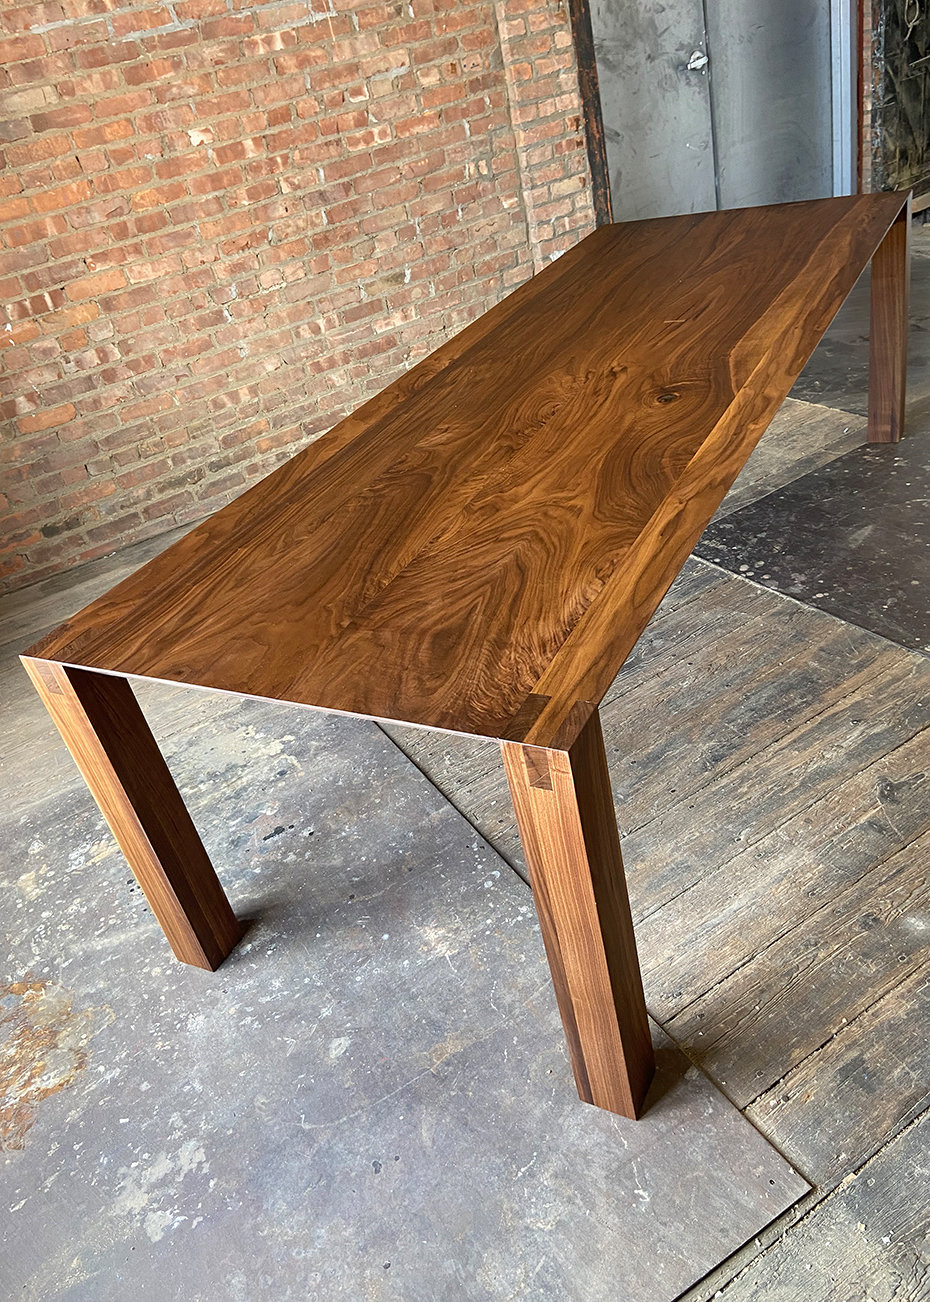 Disappearing Edge Dining Table